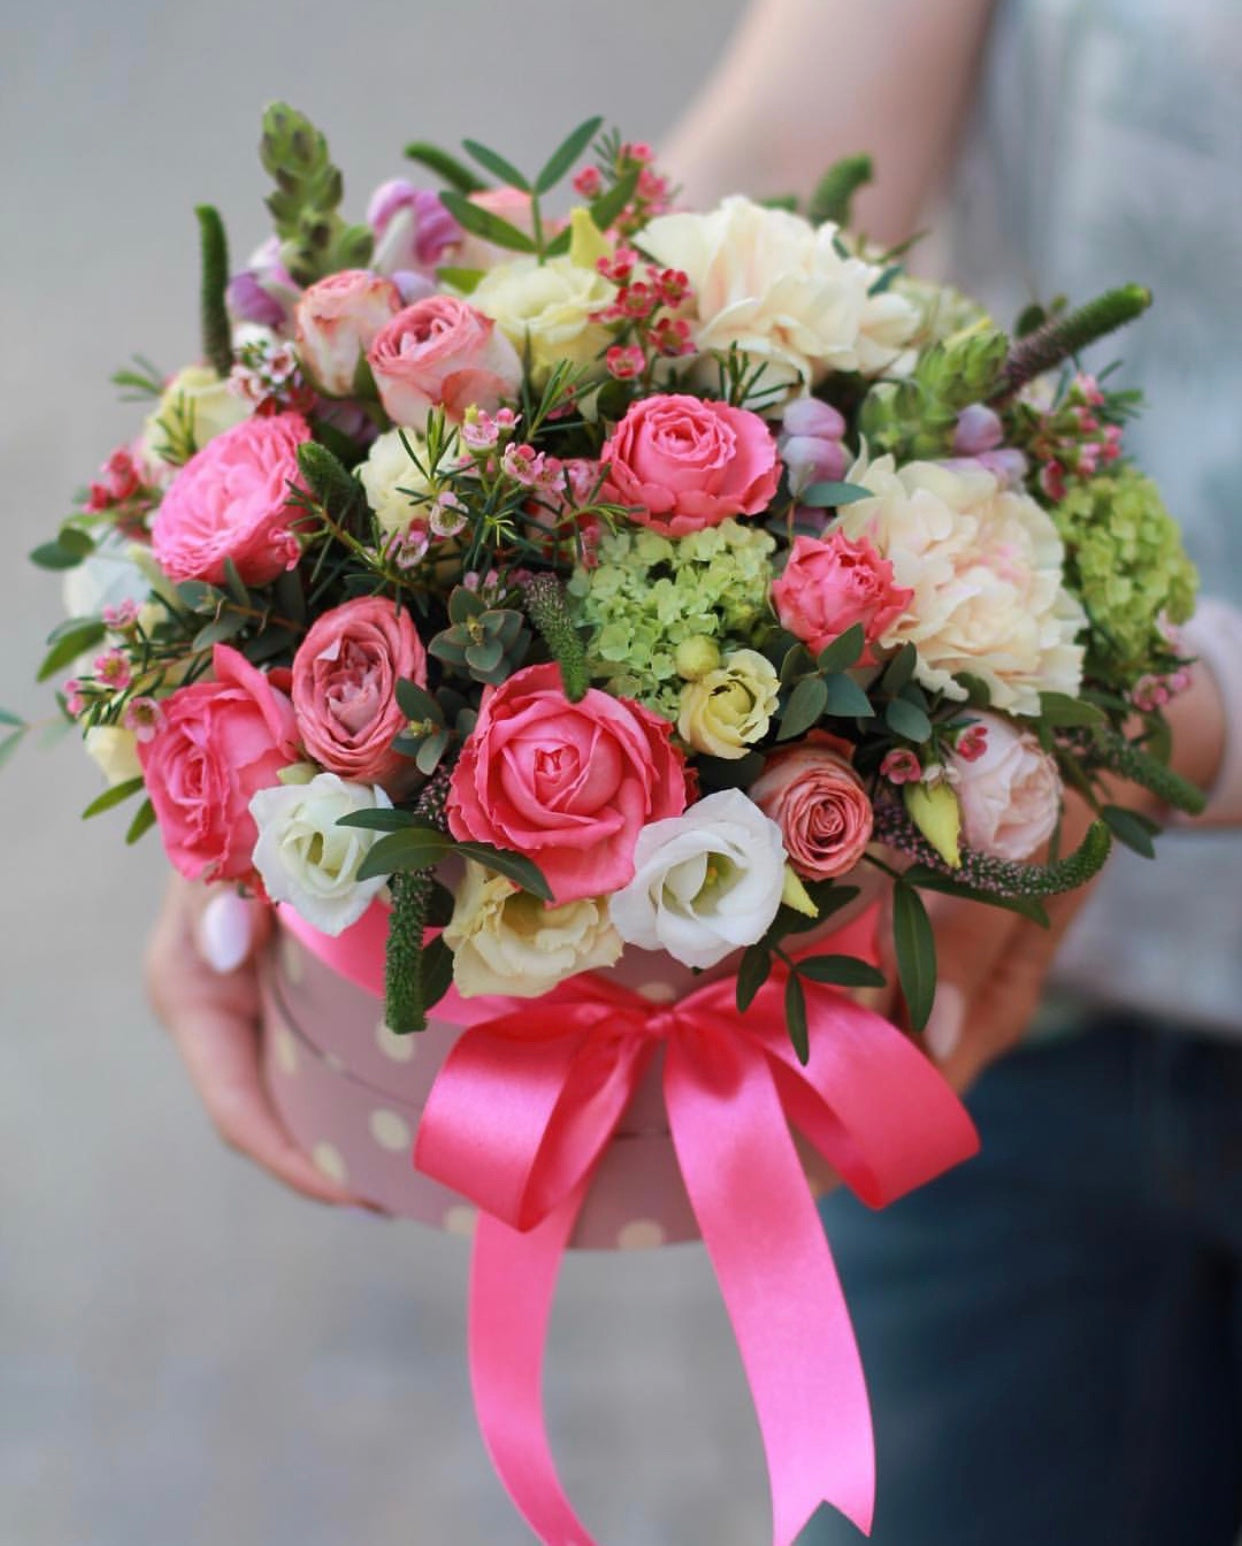 Pop goes the pink! A gorgeously chic gift for any occasion, this pink, white and green bouquet is pure fun.